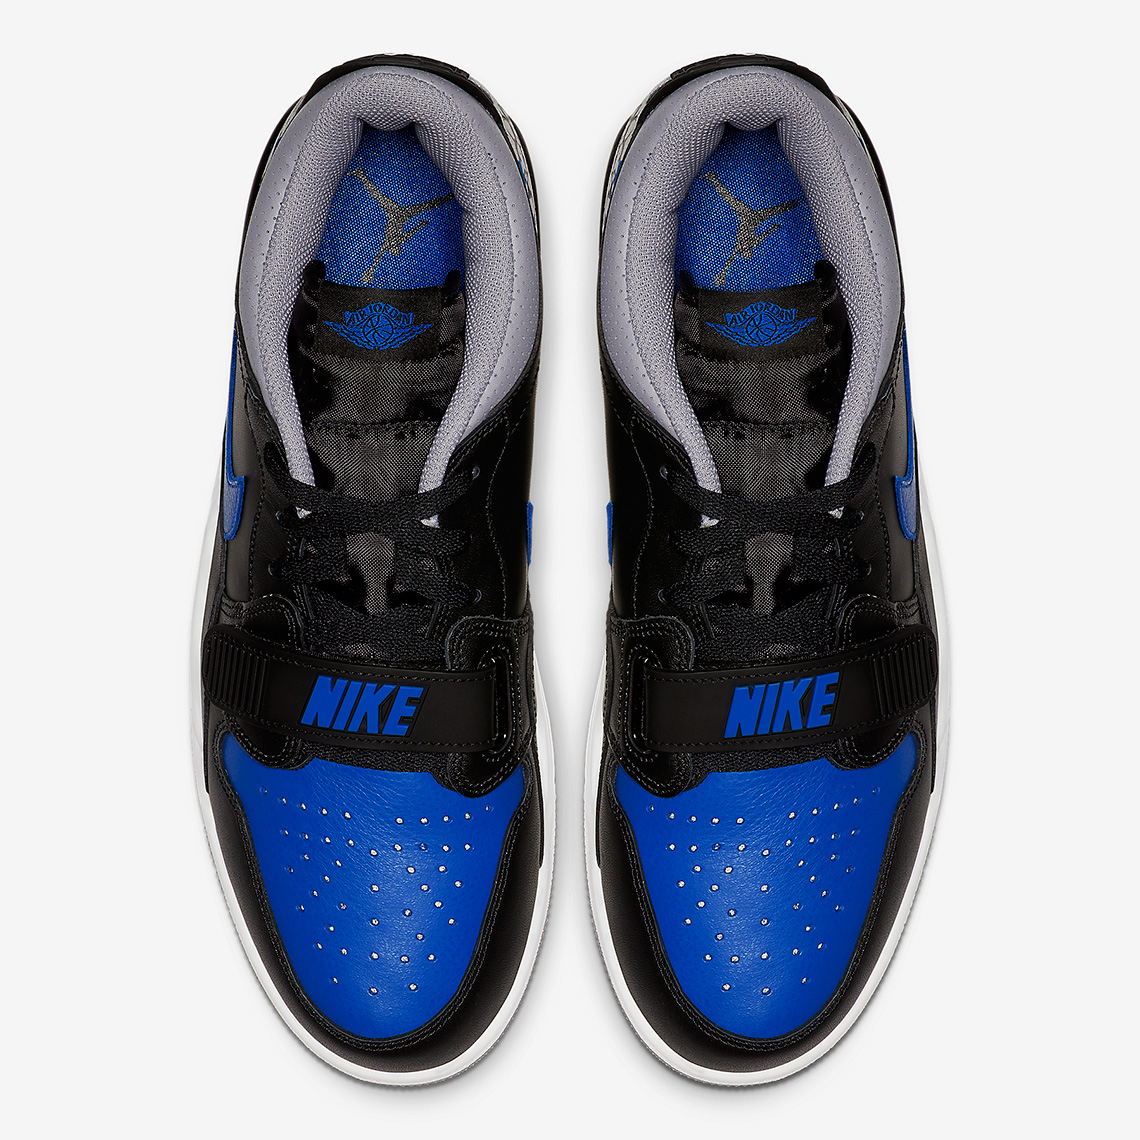 Jordan Legacy 312 Low &quot;Royal&quot; Pays Homage To A Classic: Official Images